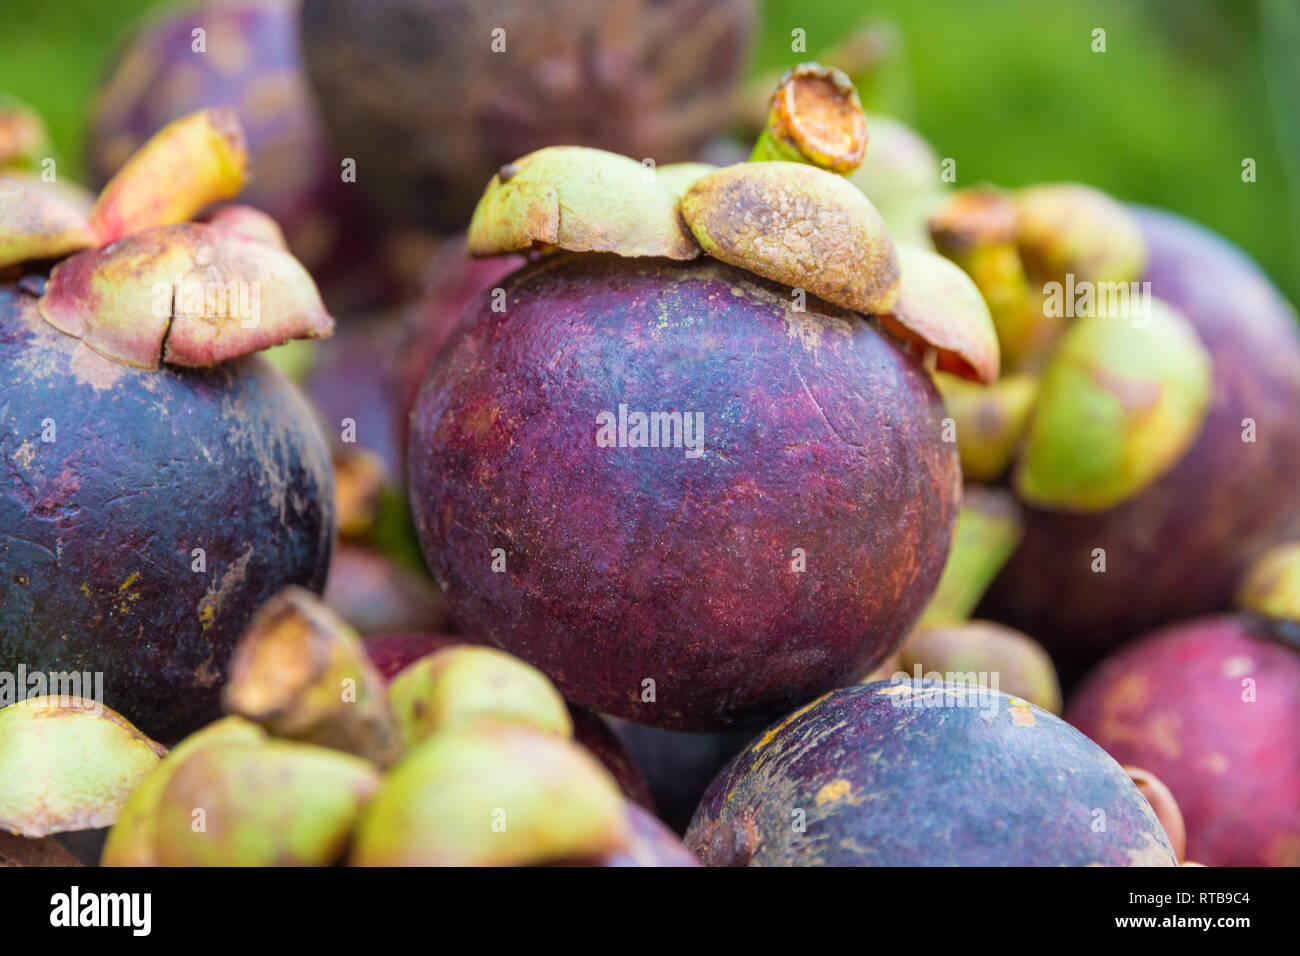 Beautiful close-up view of a singled out mangosteen fruit (Garcinia mangostana) stacked on top of other fruits. The ripe mangosteen fruit with the... Stock Photo